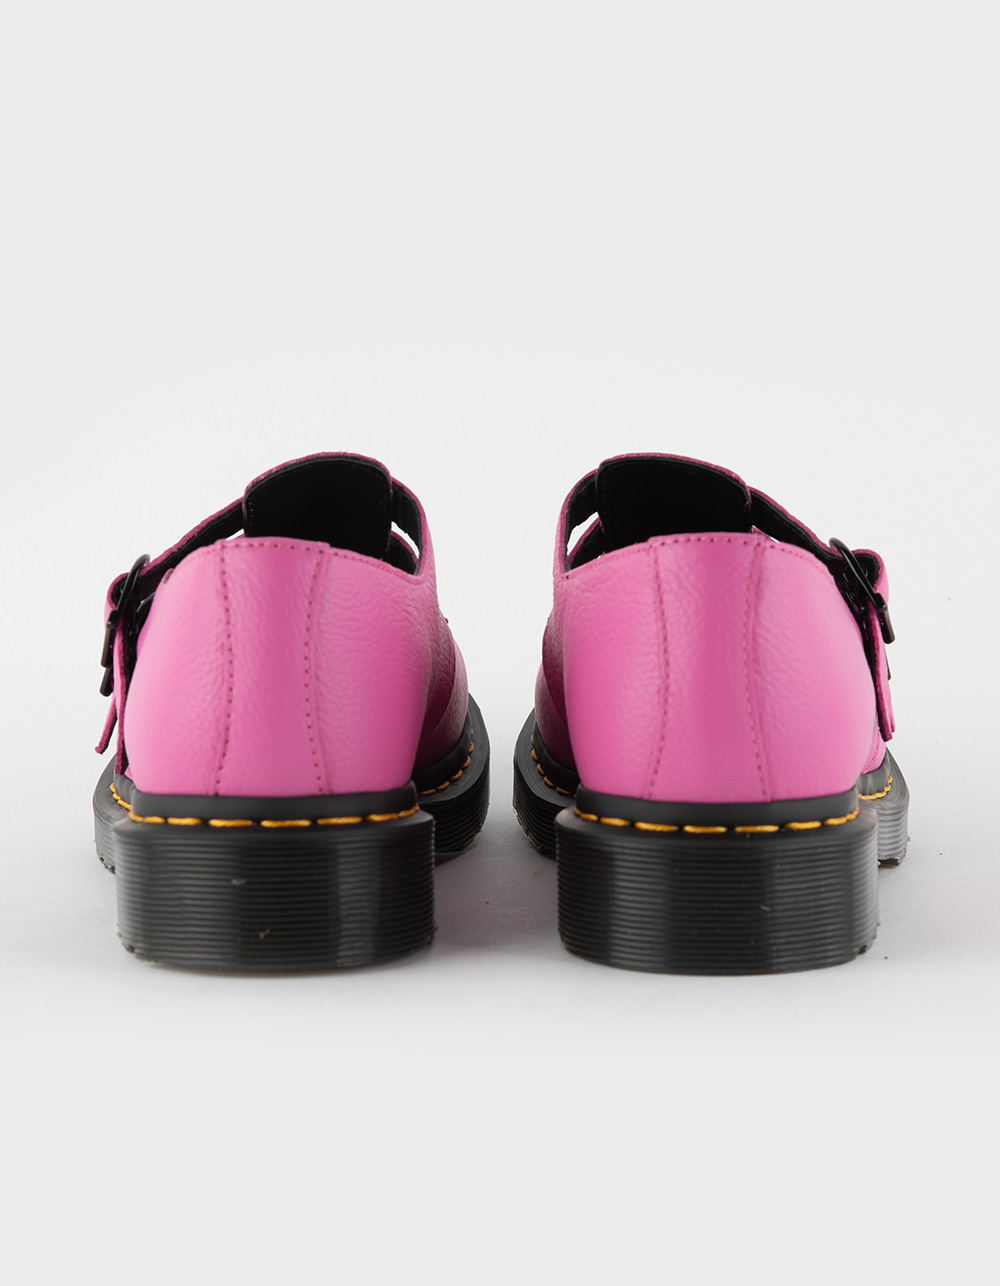 DR. MARTENS 8065 Mary Jane Womens Shoes - PINK | Tillys